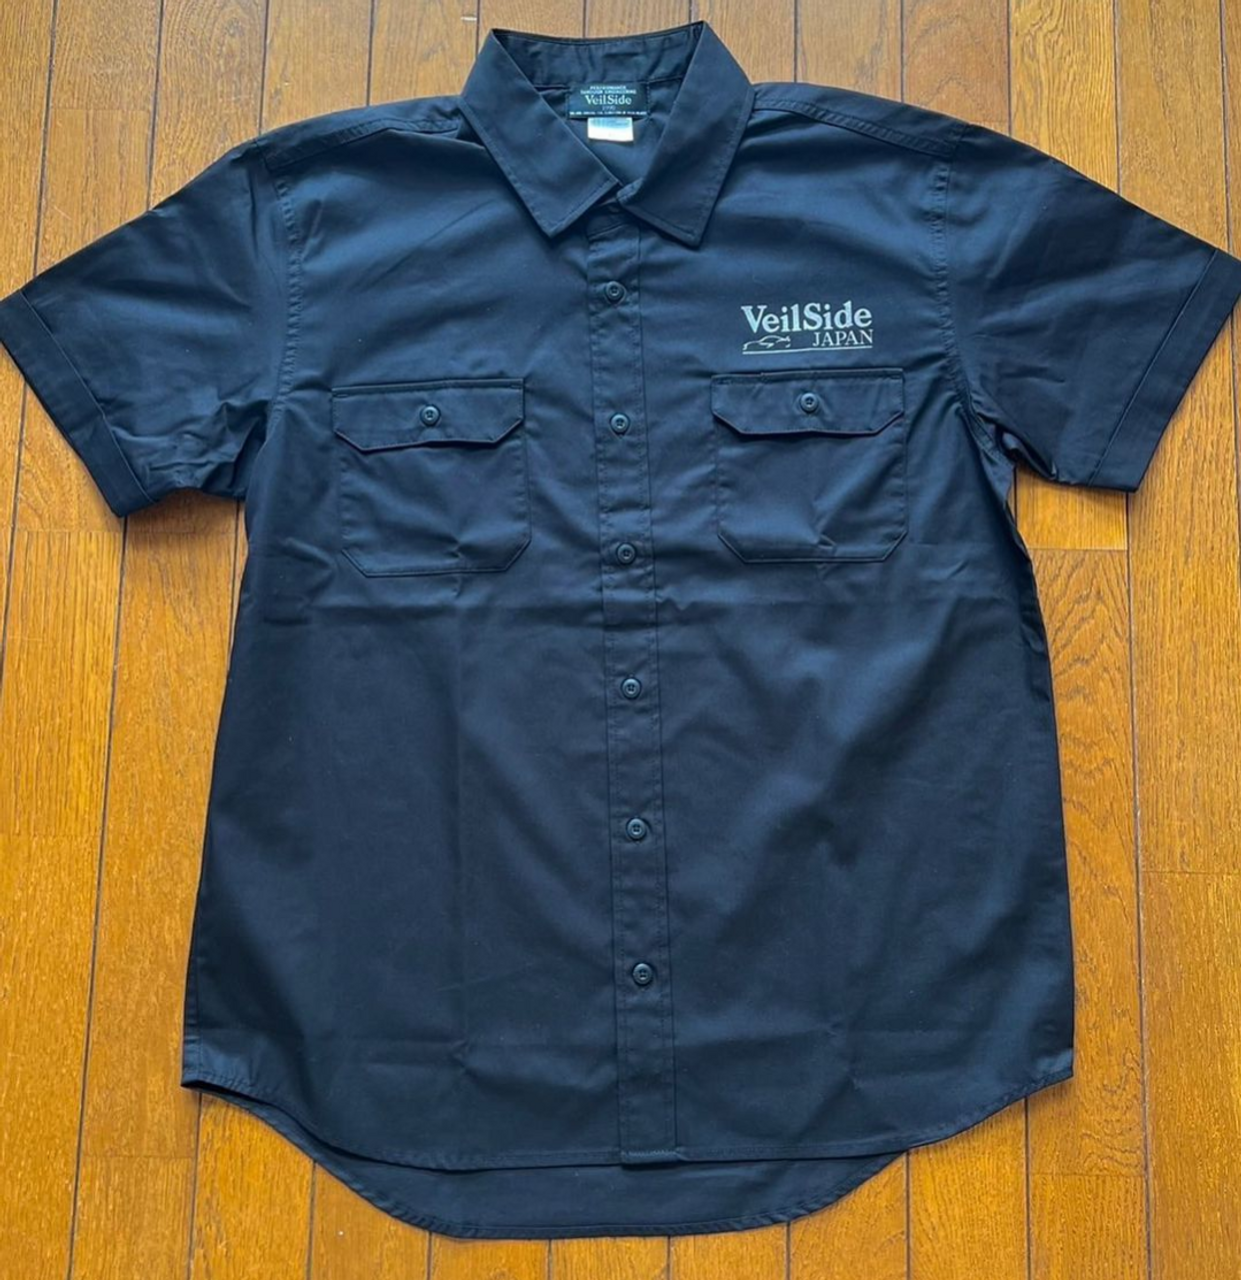 AUTHENTIC LOUIS VUITTON BUTTON MARKED POLO SHIRT BLACK SIZE SMALL